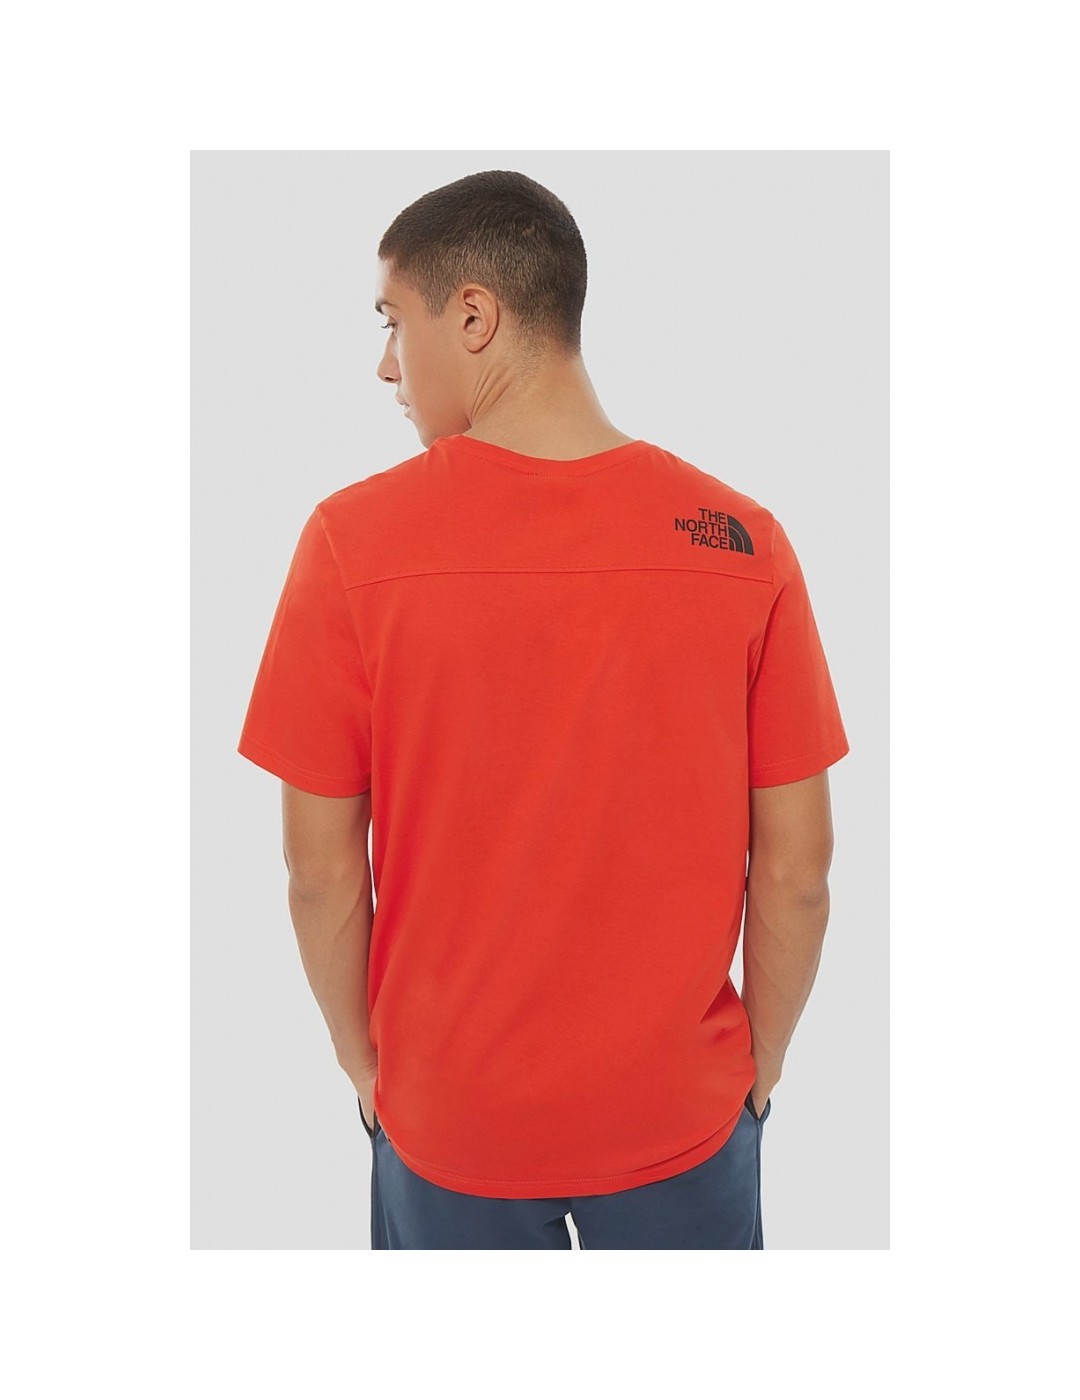 CAMISETA THE NORTH FACE S/S LIGHT TEE FIERY RED